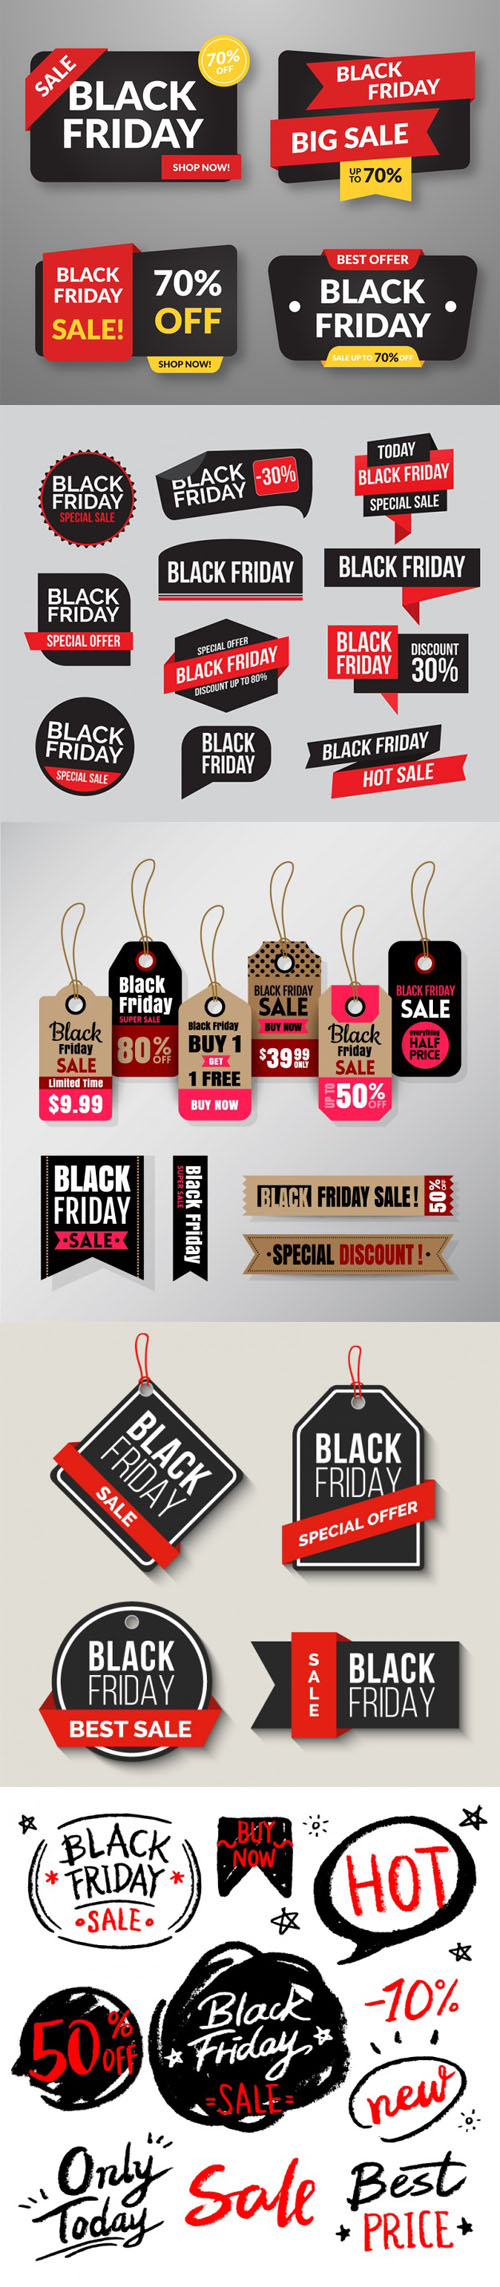 Black Friday Sales Elements Collection Vol.1